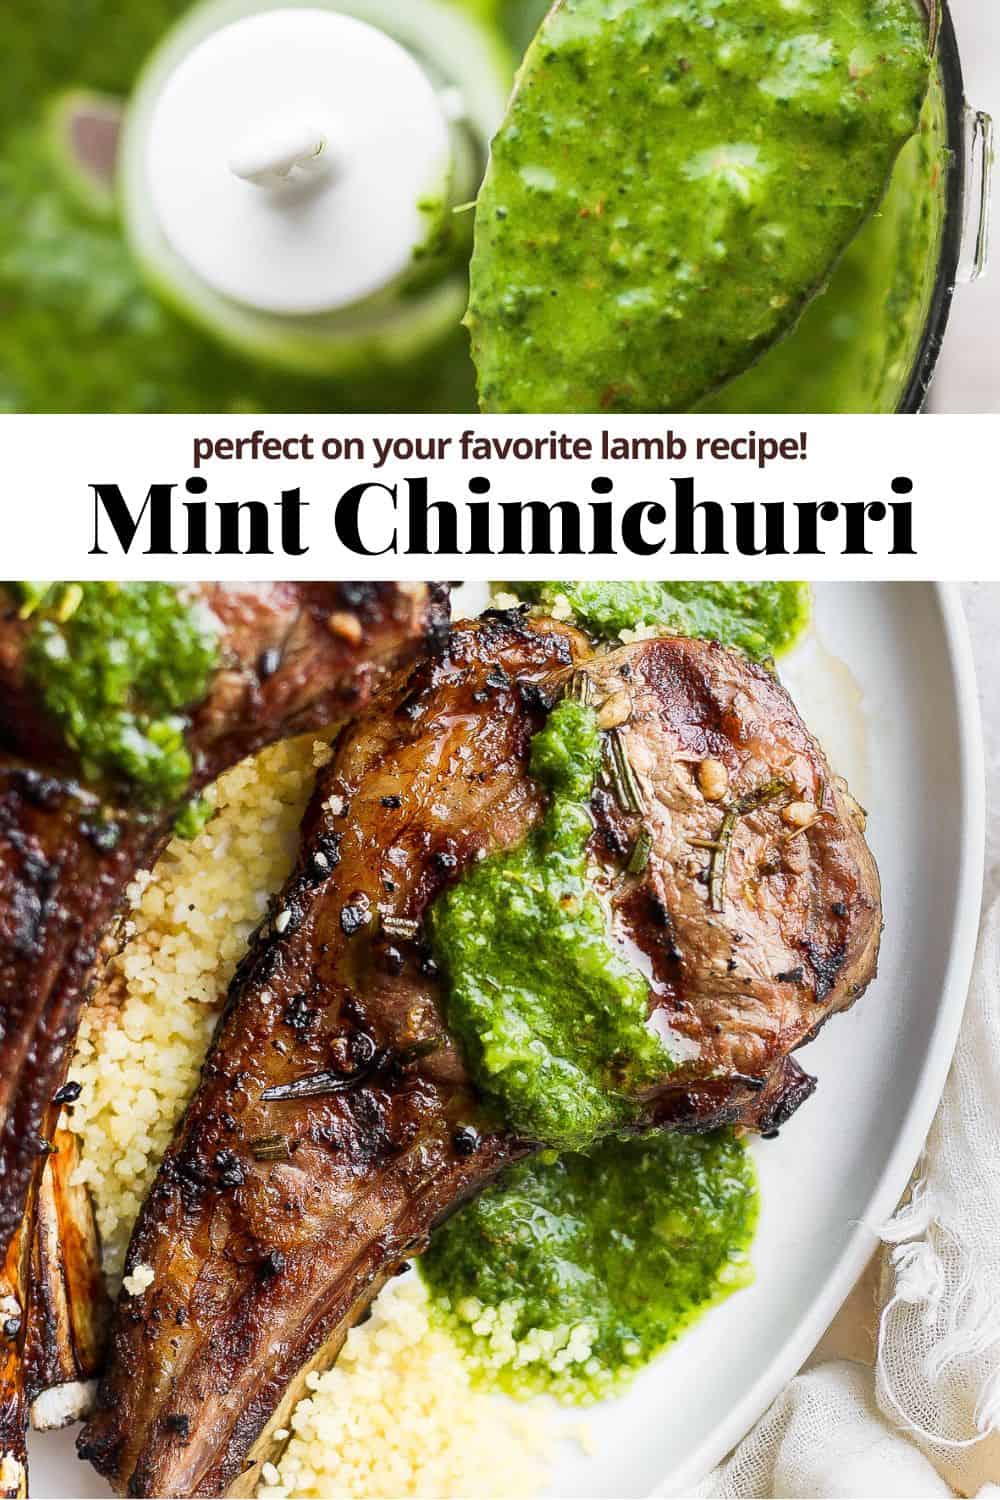 Pinterest image showing a spoonfull of mint chimichurri, the recipe title, and the sauce drizzled over lamb chops.